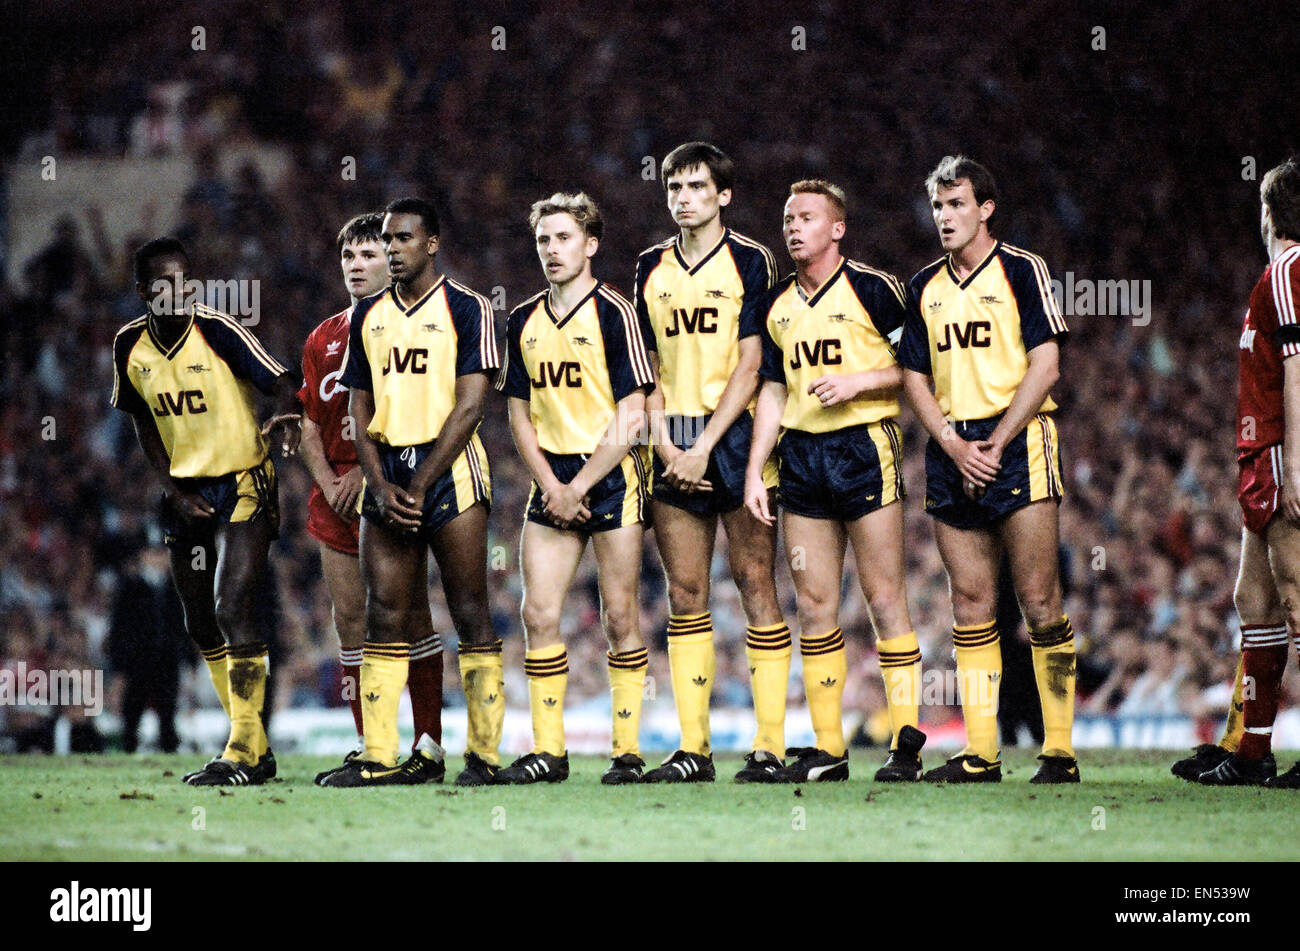 English League Division One match at Anfield. Liverpool 0 v Arsenal 2 Arsenal players form a wall, l-r Michael Thomas, David Rocastle, Kevin Richardson, Alan Smith, Perry Groves and Steve Bould 26th May 1989 Stock Photo